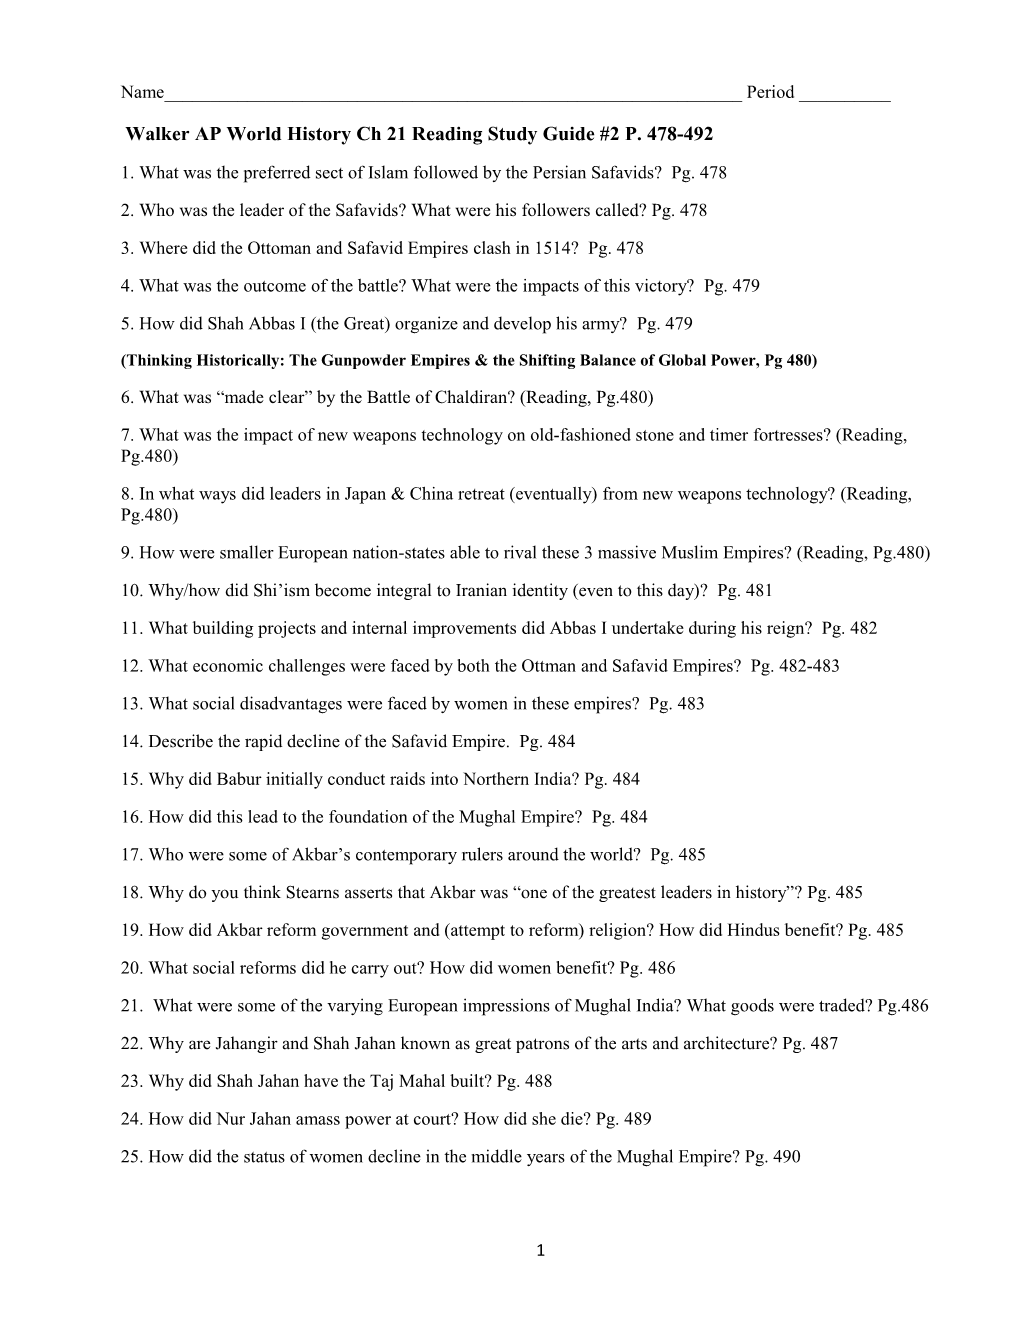 Walker AP World History Ch 21 Reading Study Guide #2 P. 478-492